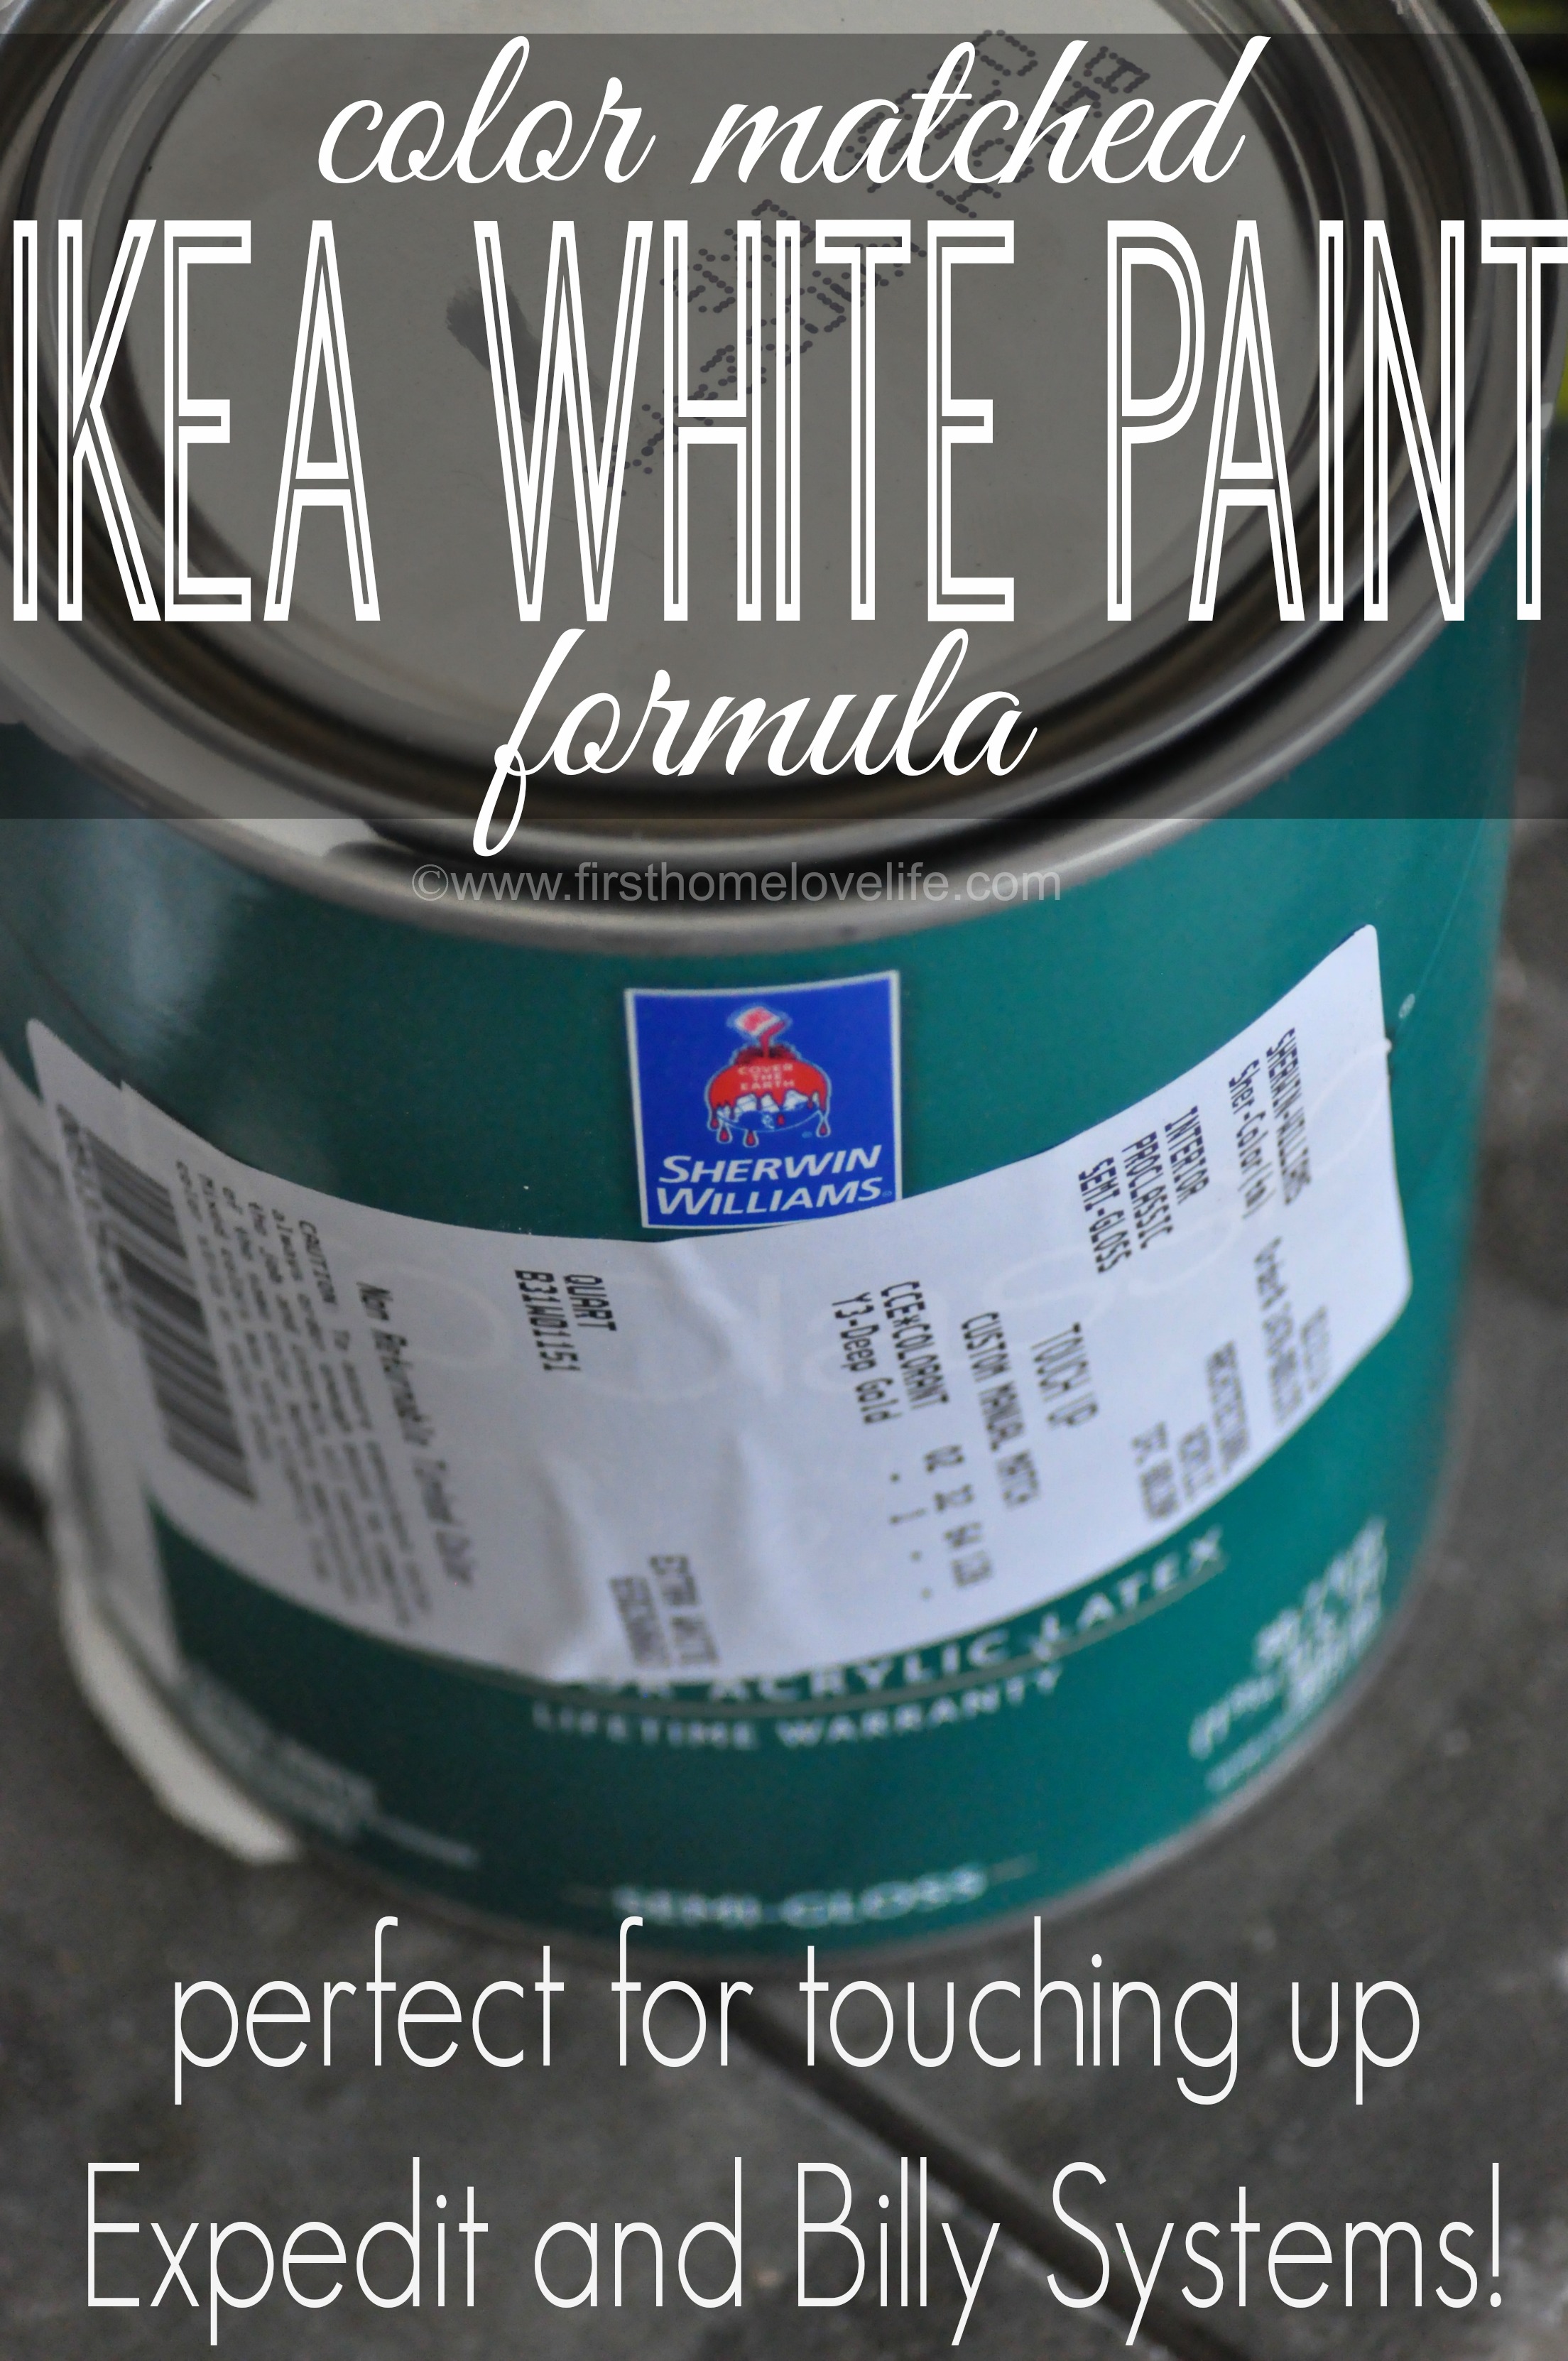 Finally! The perfect color matched formula for IKEA white paint! Perfect for touching up those Billy bookcases and Expedit systems! www.firsthomelovelife.com #diy #ikea #paint